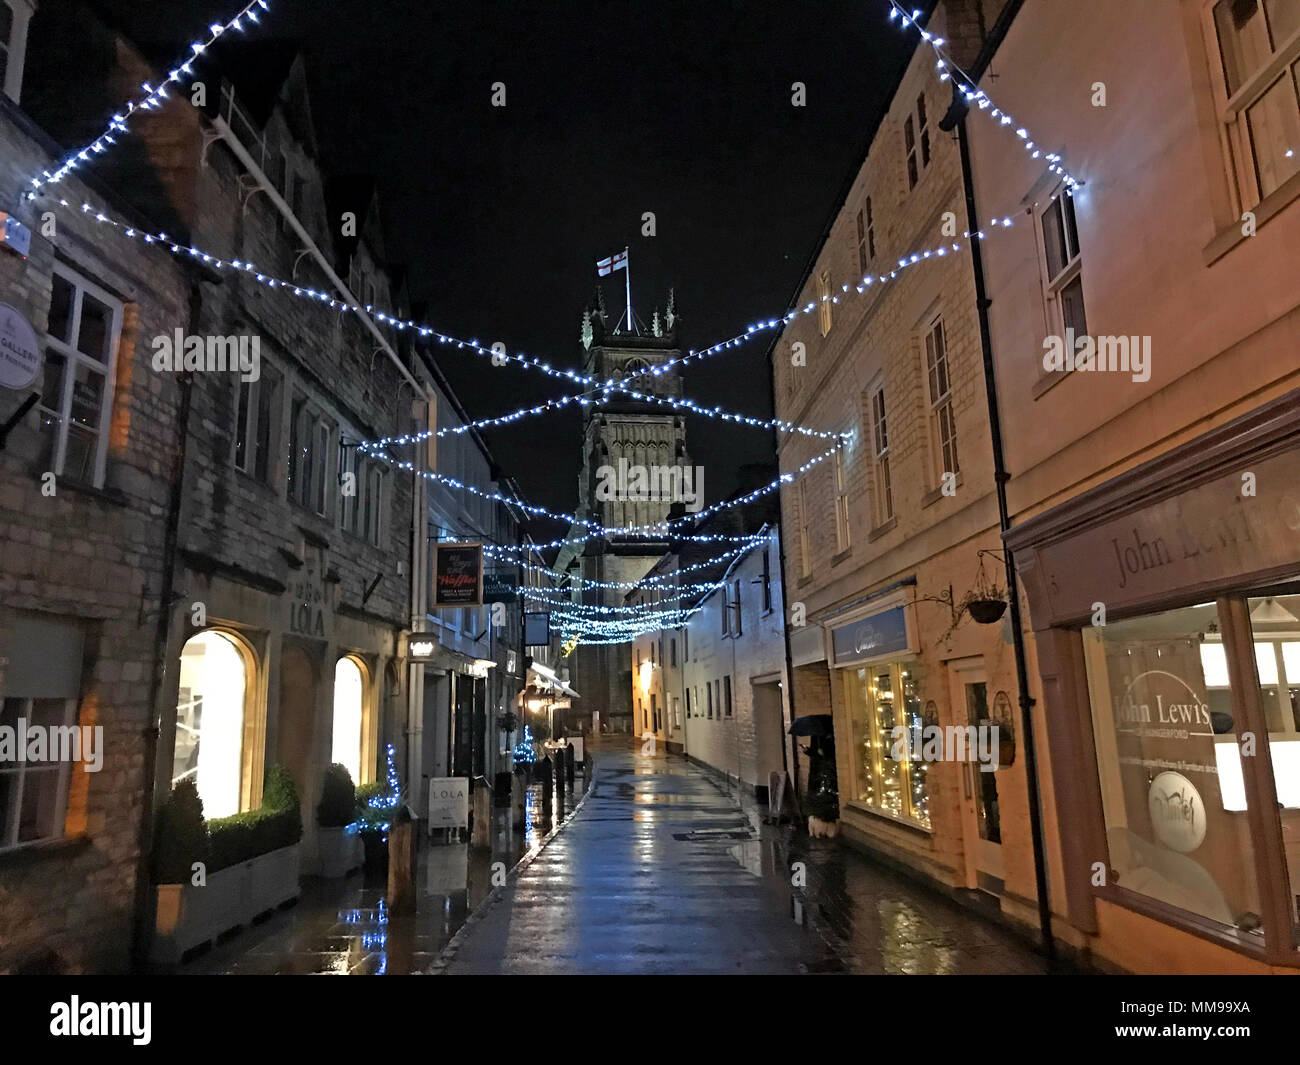 Marché de Cirencester Town Center at night, Cotswolds, England, UK Banque D'Images